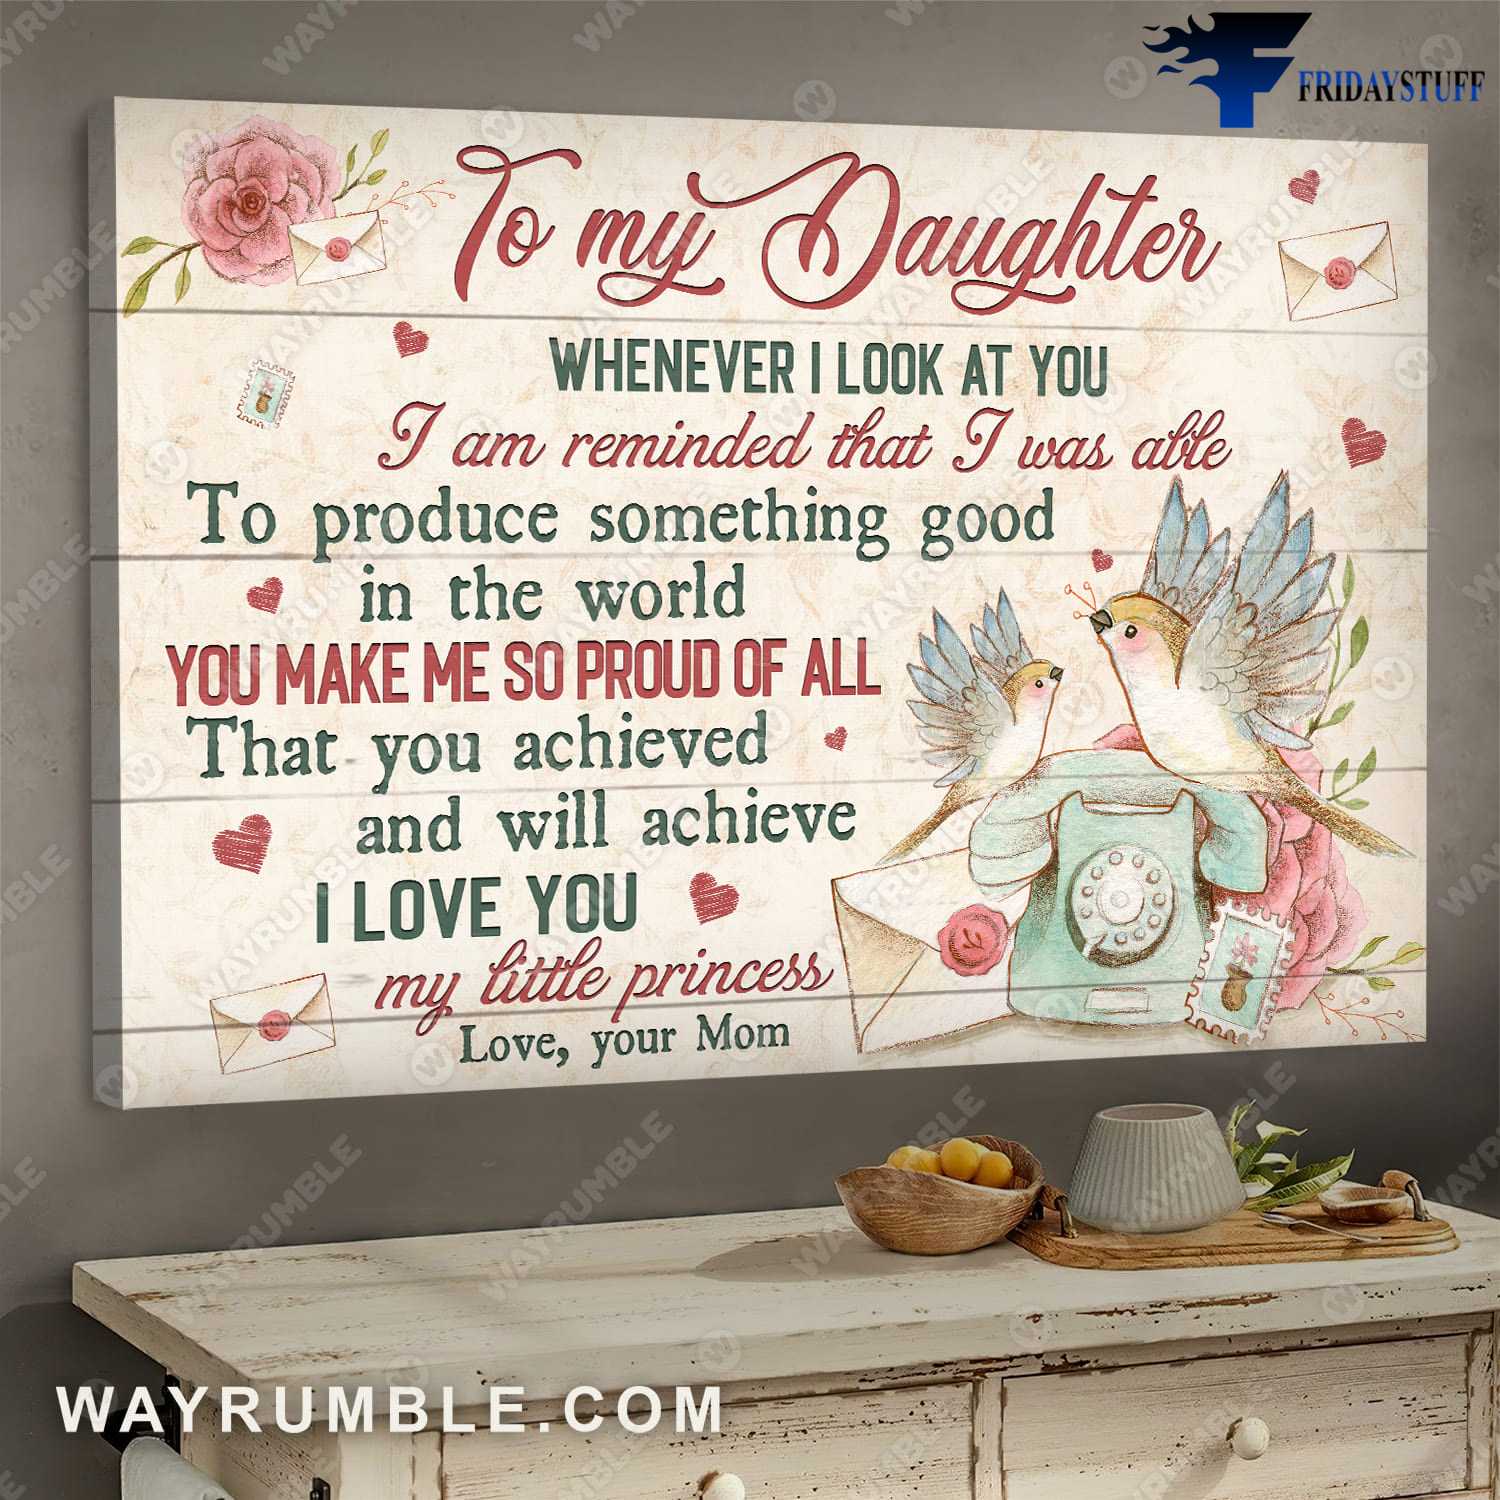 Gift For Daughter, Mom And Daughter, To My Daughter, Whenever I Look At You, I Am Reminded That I Was Able, To Produce Something Good In The World